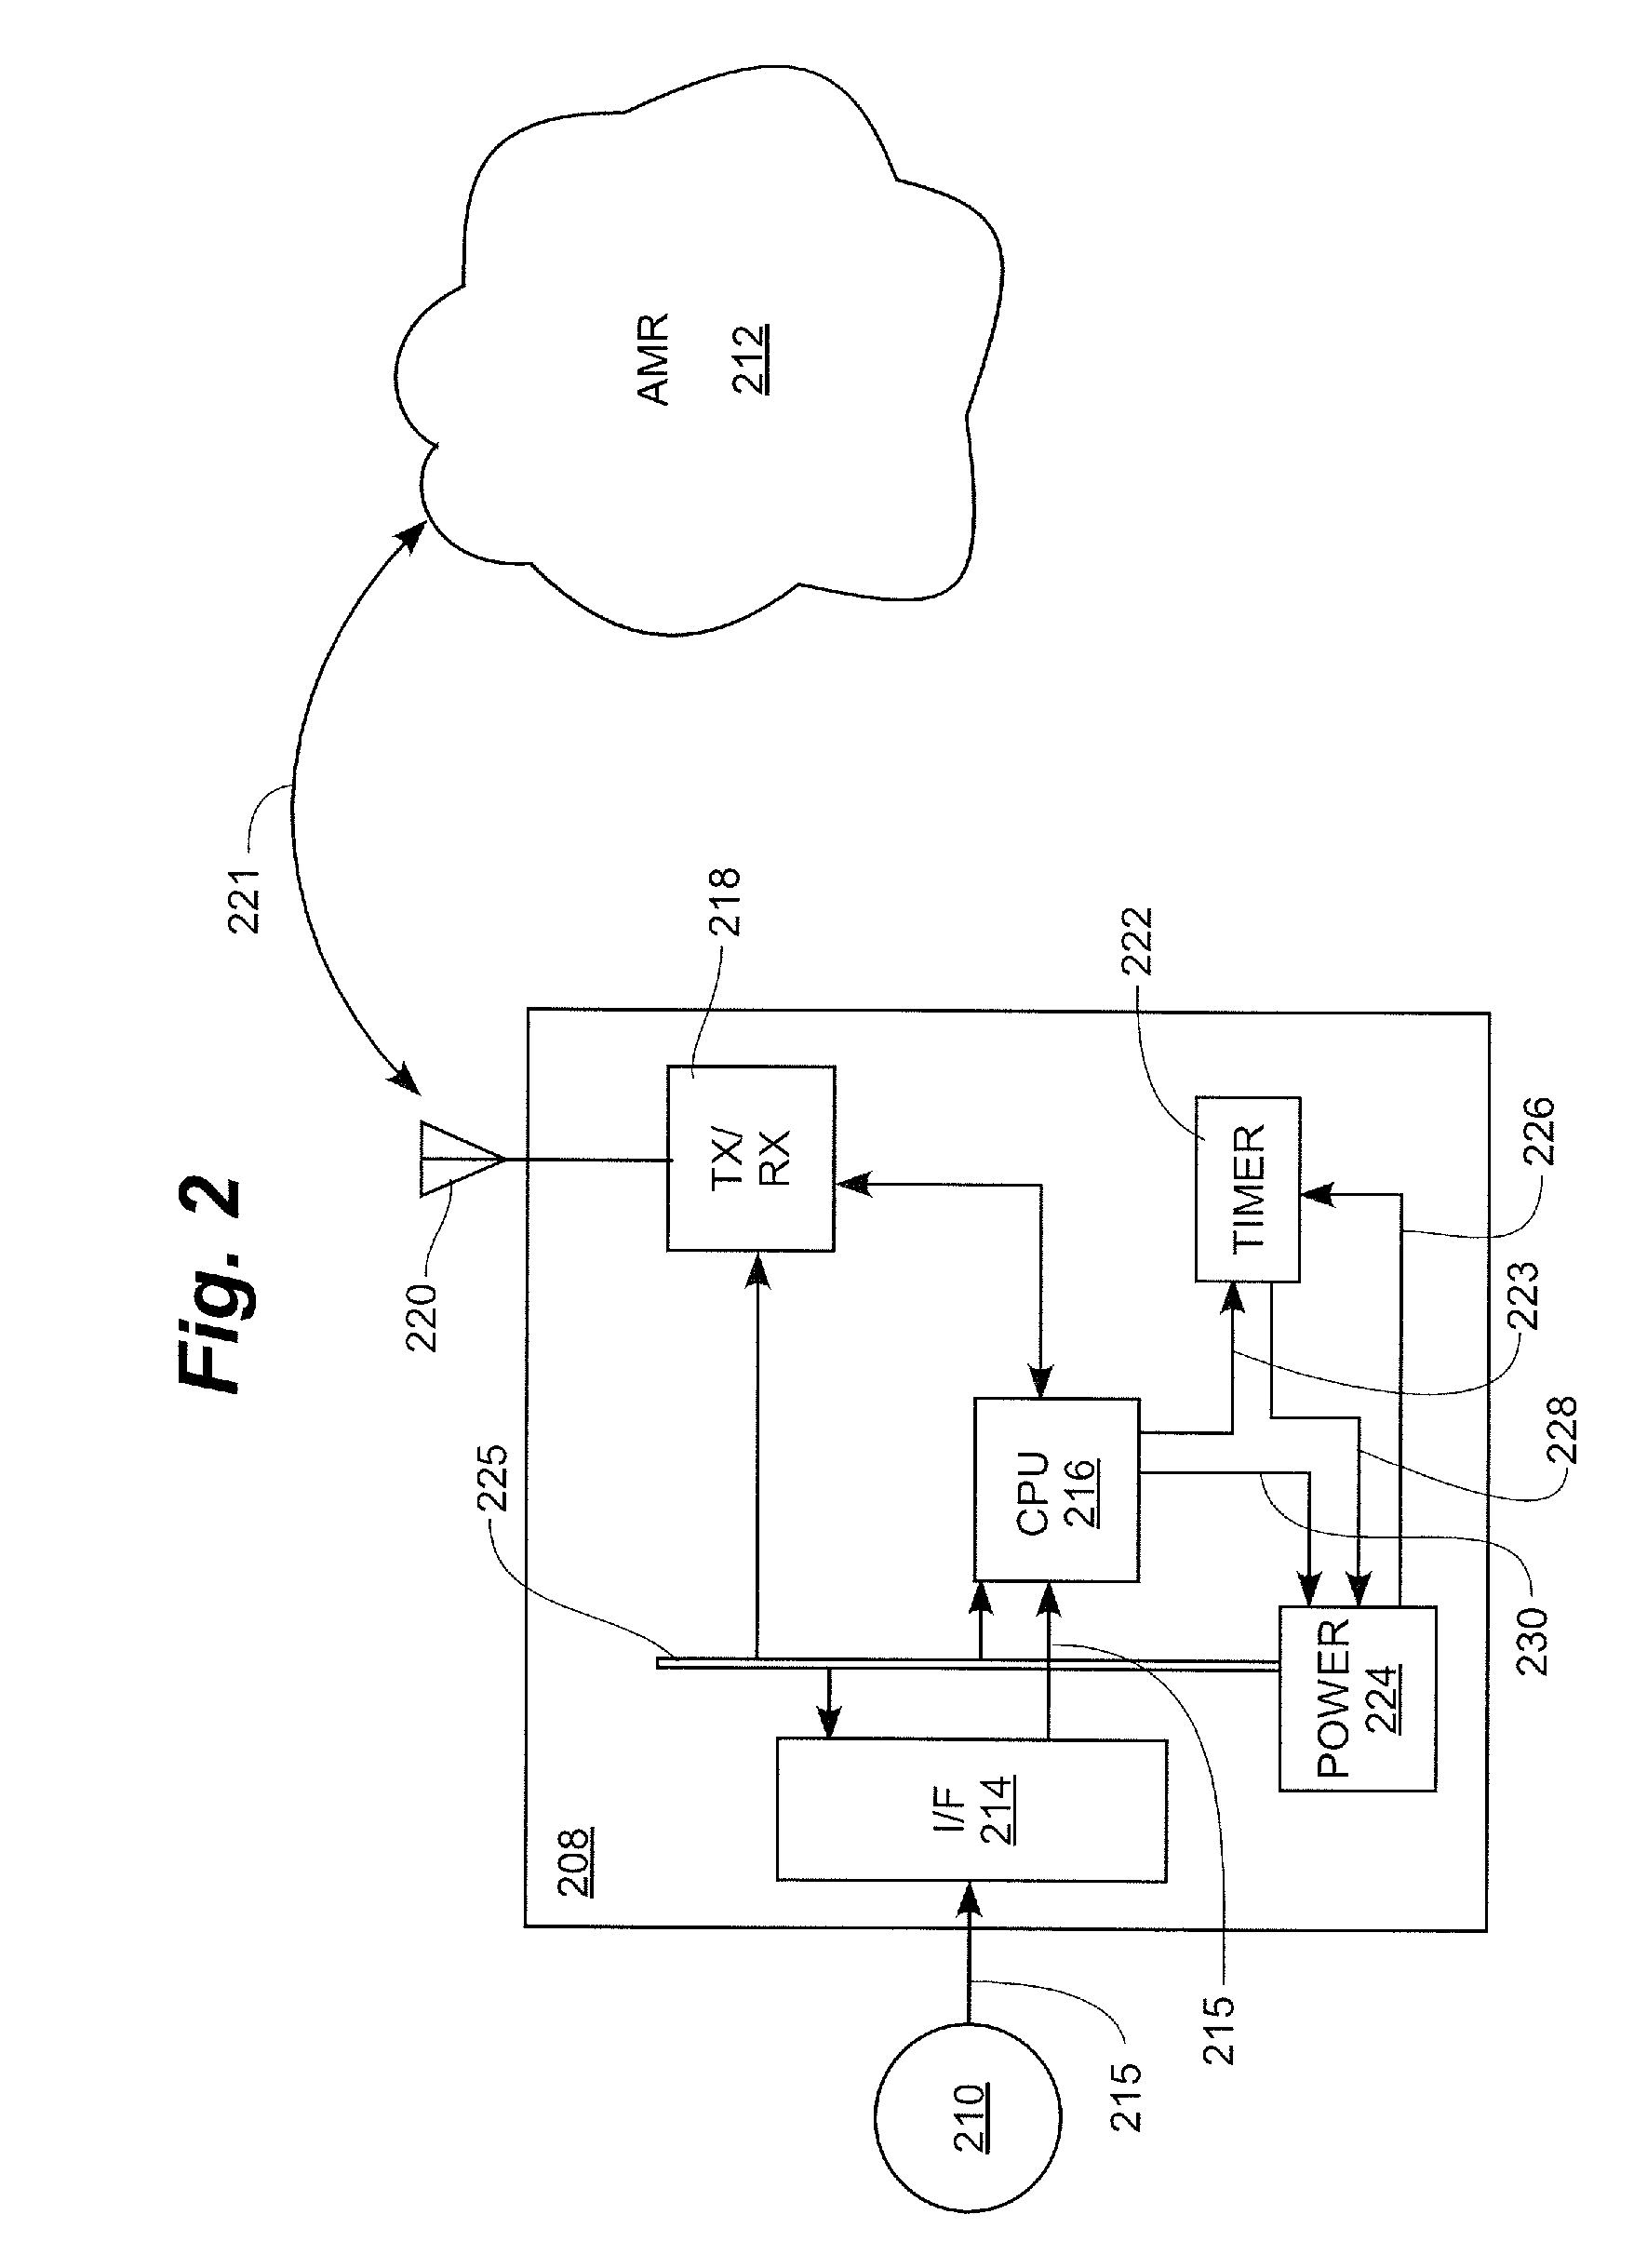 Automatic detection of unusual consumption by a utility meter